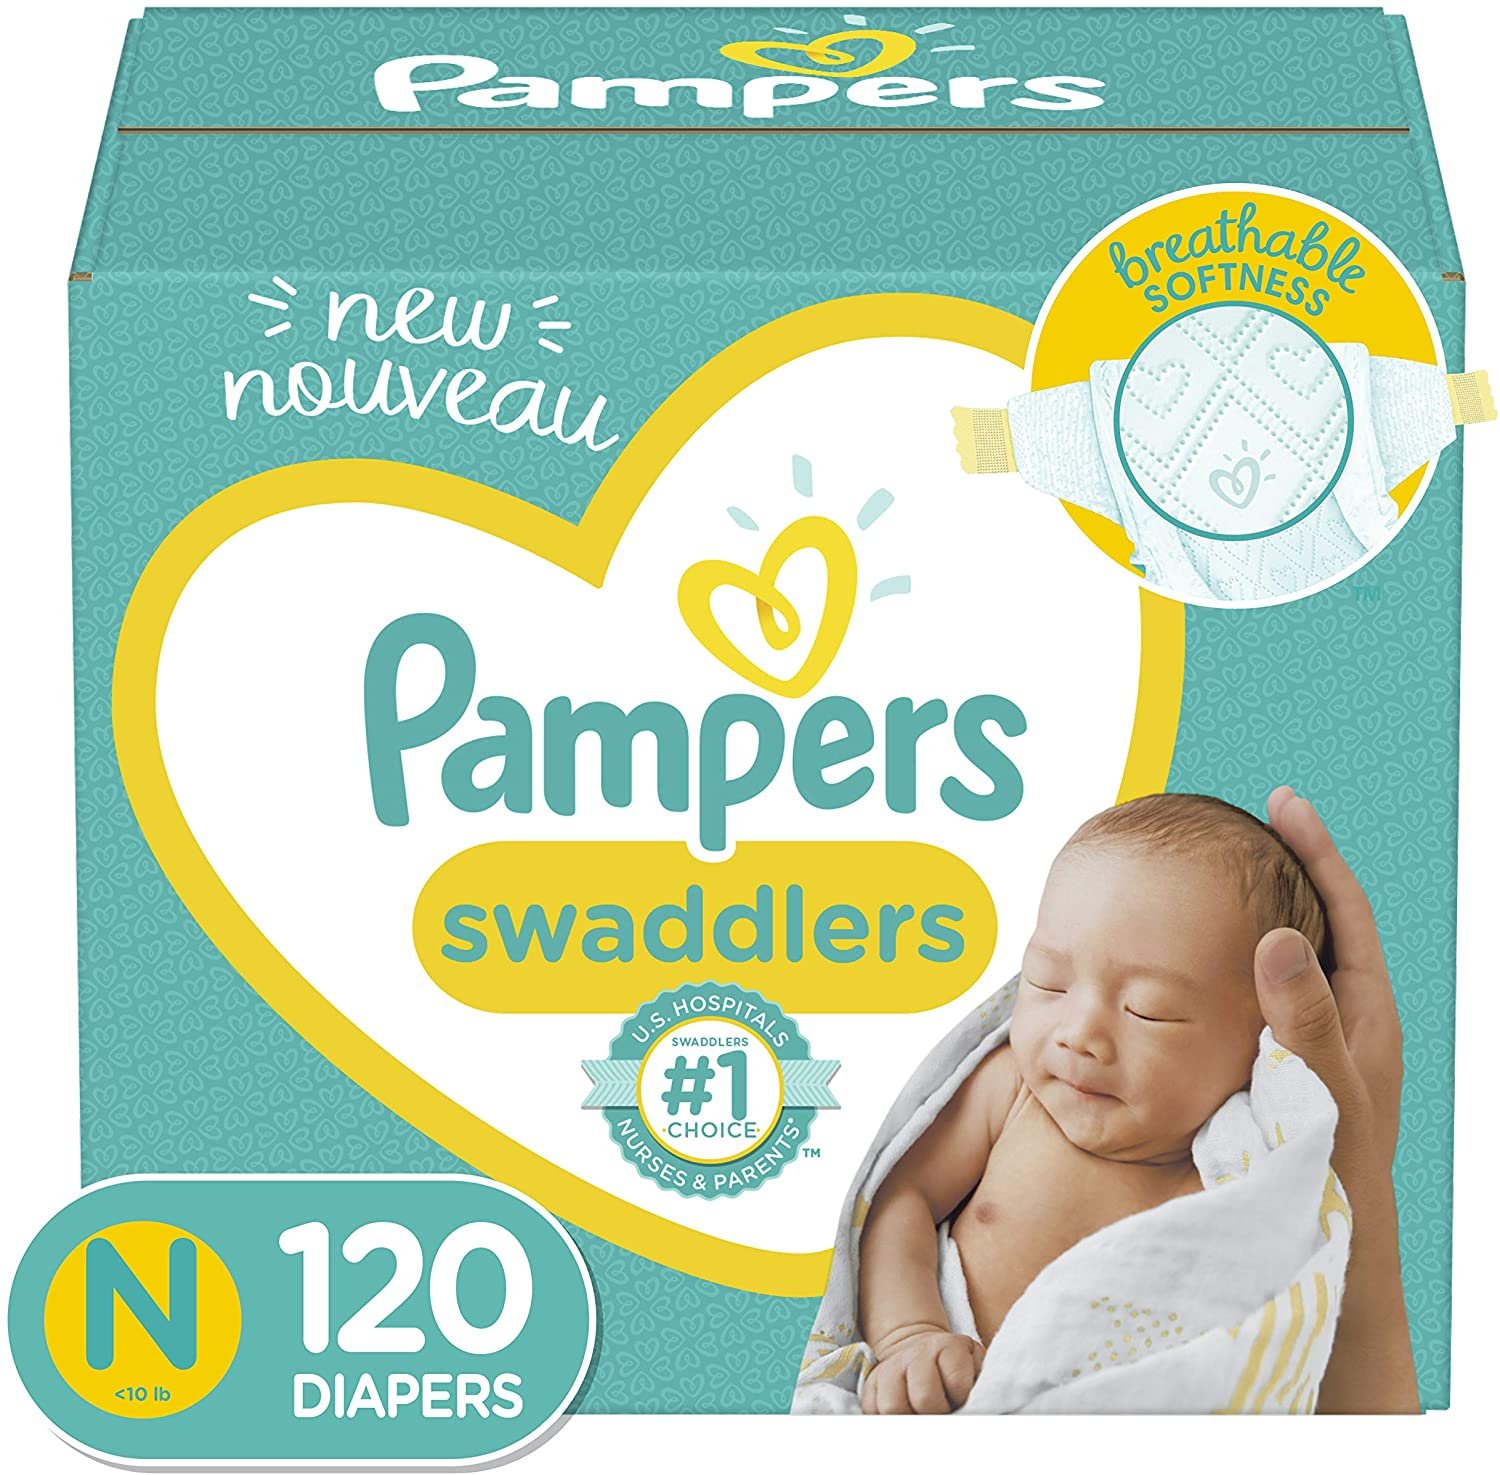 4. Pampers Swaddlers Disposable Diapers 